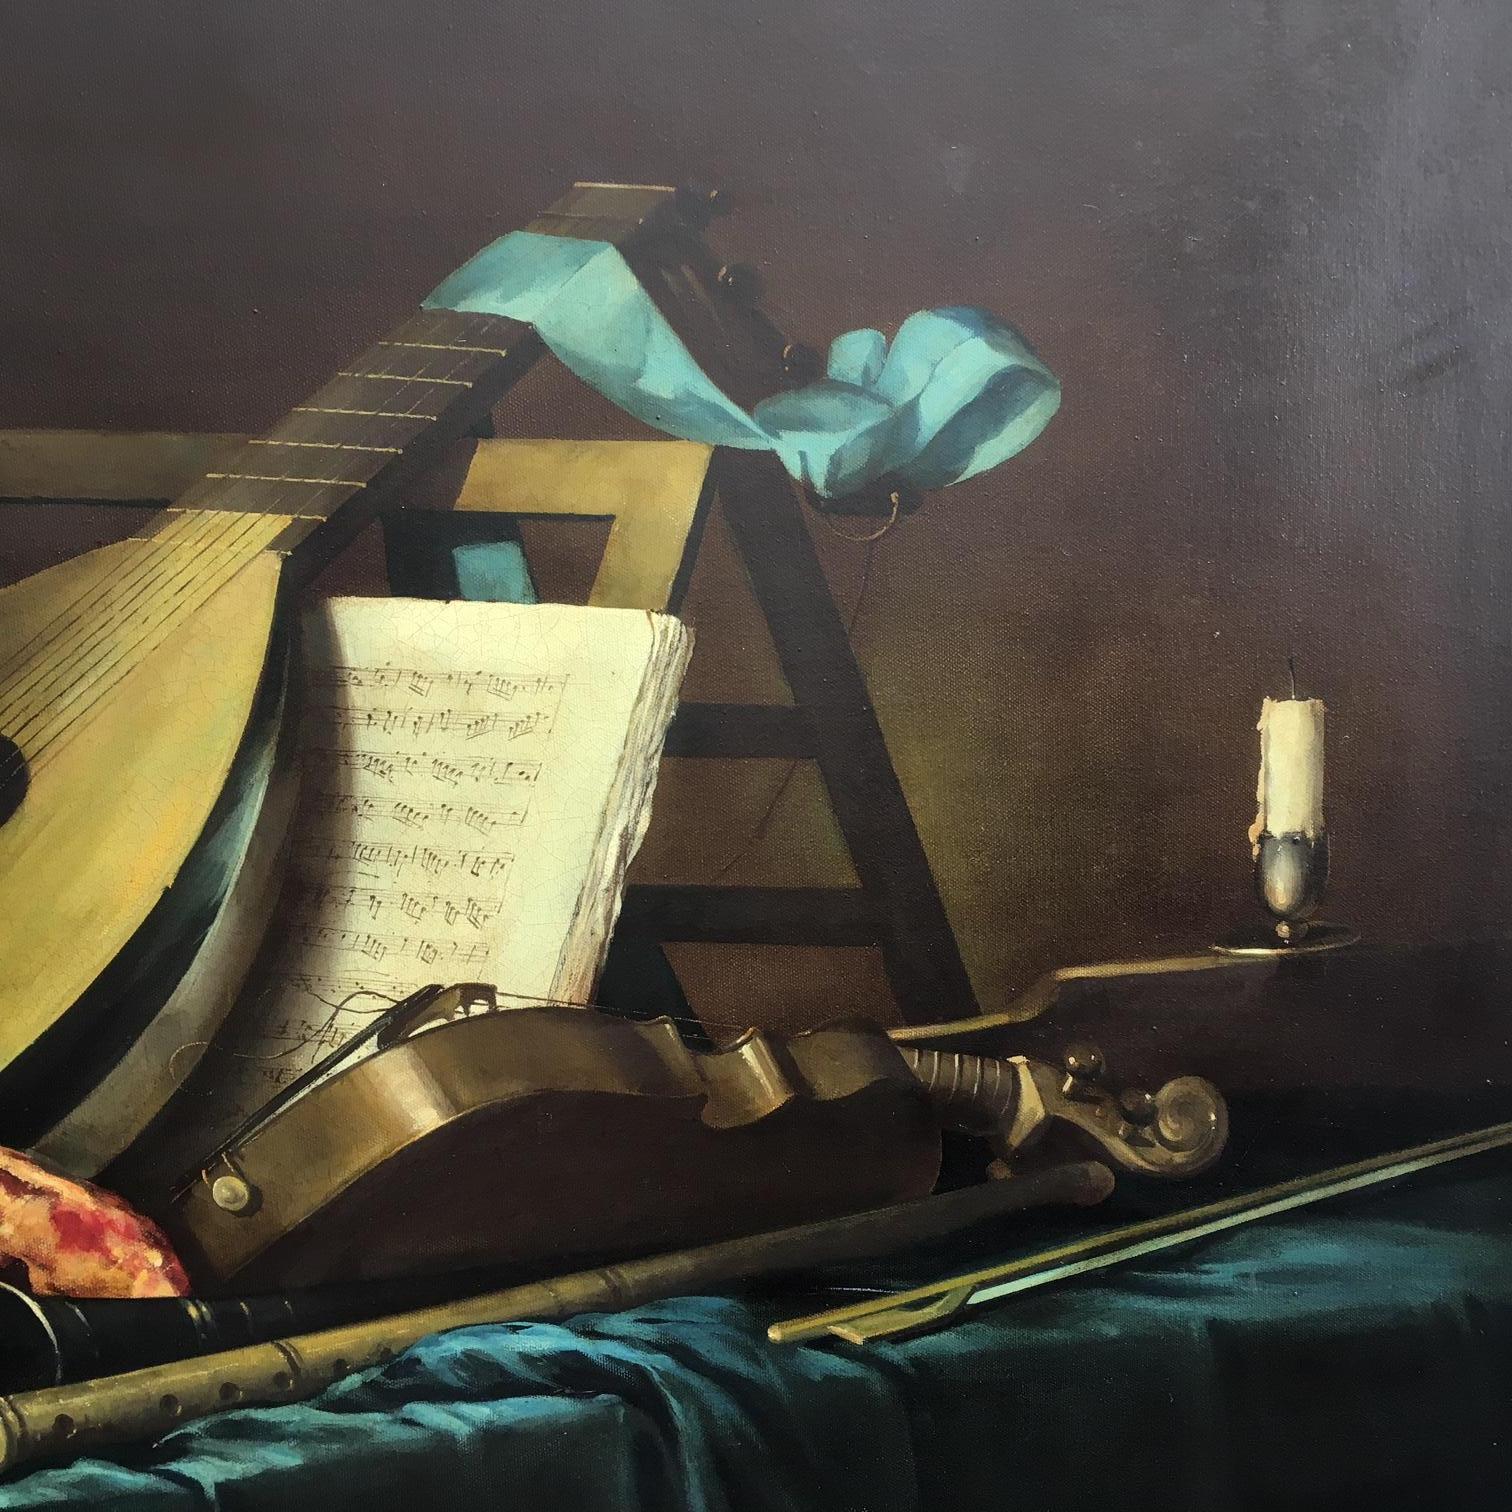 Still life - Salvatore Marinelli Italia 2010 - Oil on canvas cm.70x100
Salvatore Marinelli's painting is inspired by the painting by Anne Vallayer-Coster French painter. Music score painting is a rare type of painting that represents a musical work